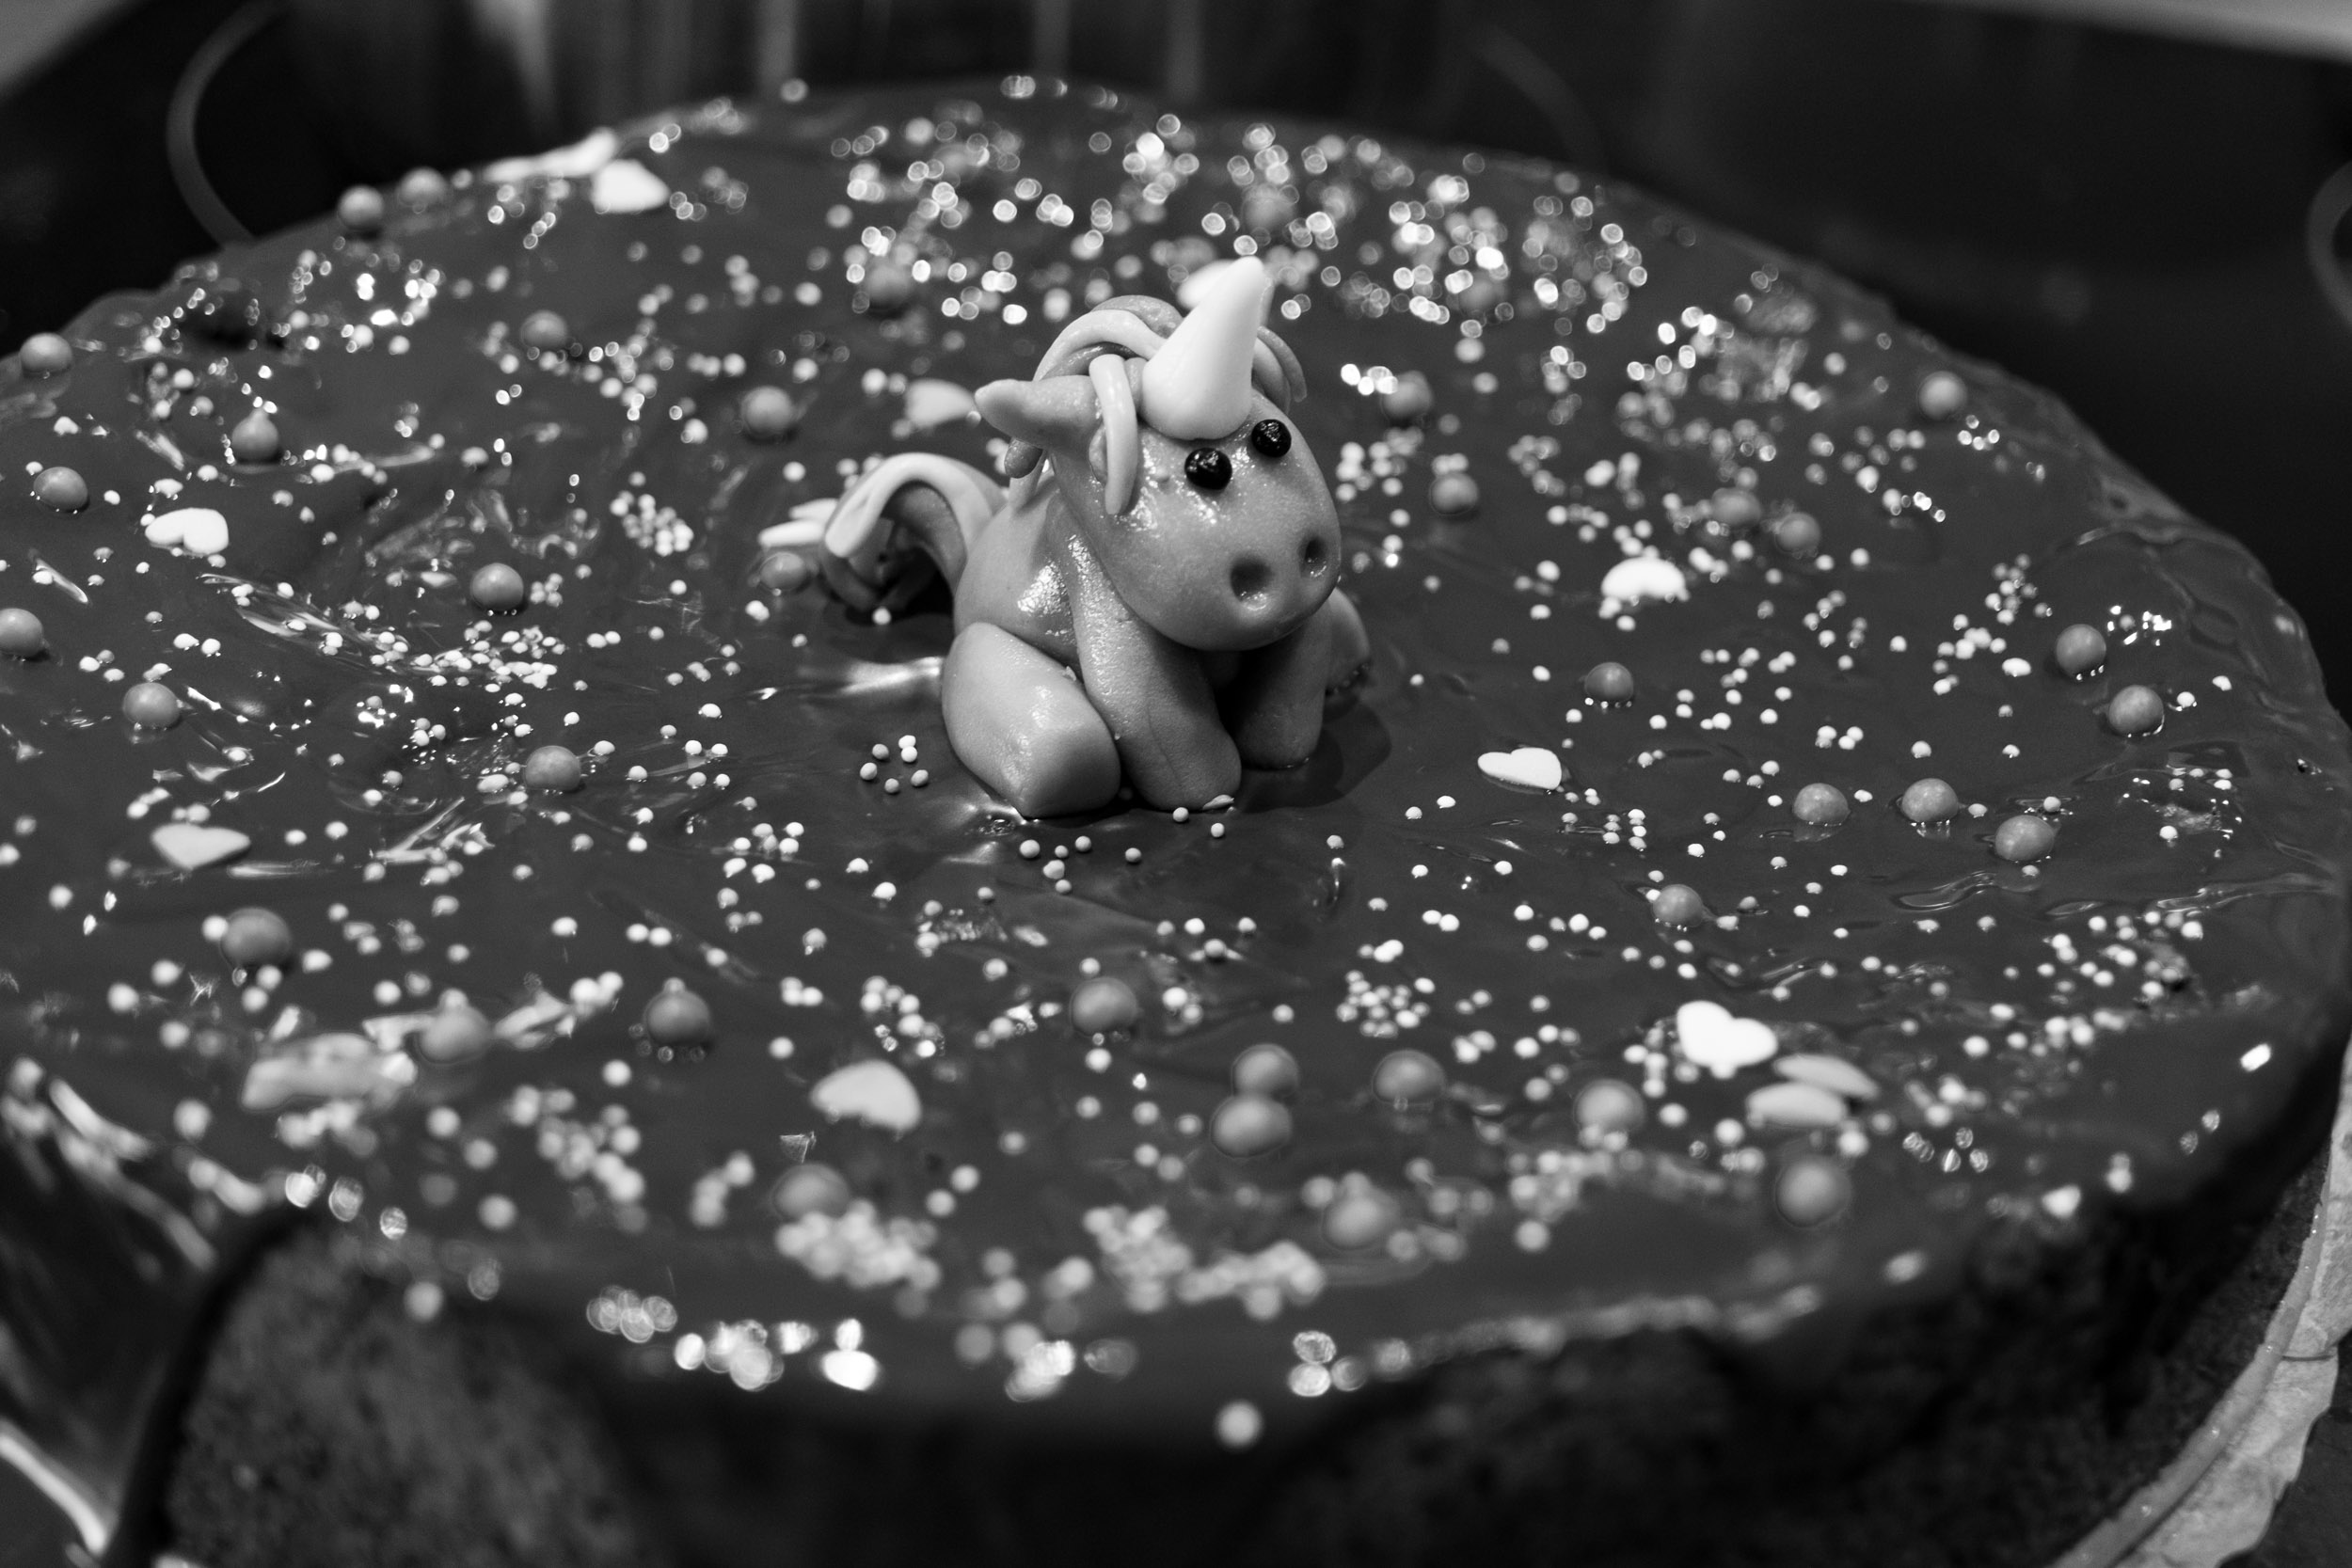 A fondant unicorn sitting on top of a chocolate cake I baked for my daughters birthday.